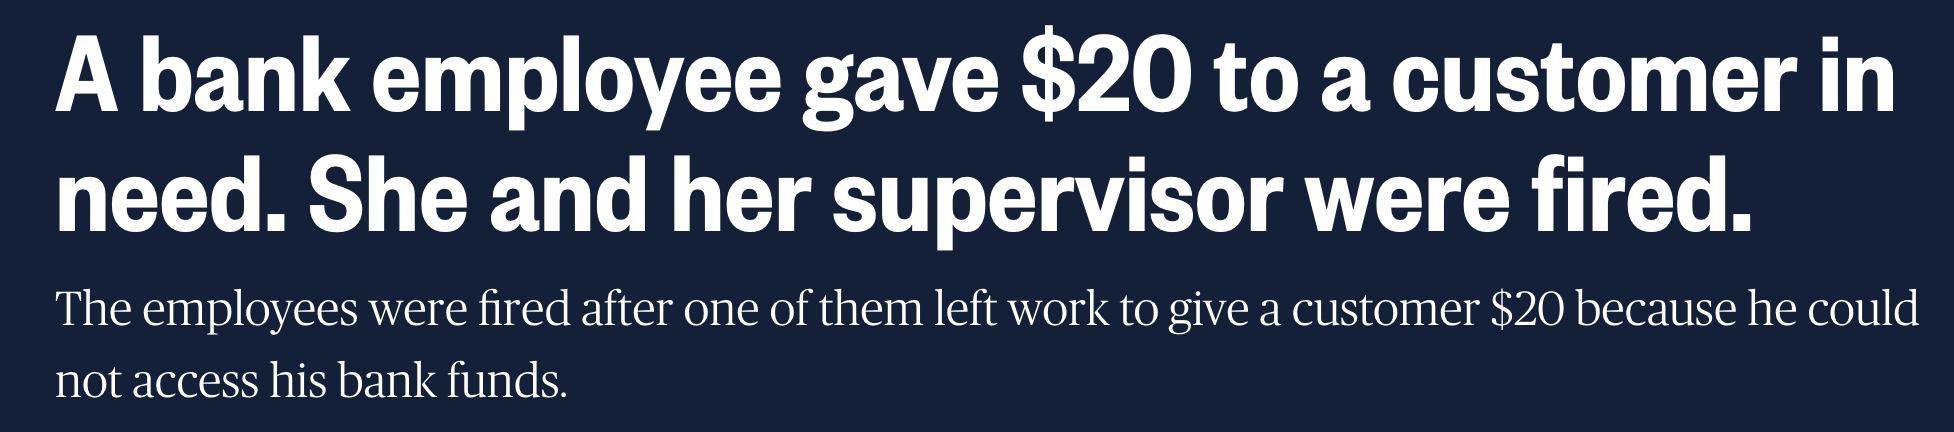 &quot;A bank employee gave $20 to a customer in need. She and her supervisor were fired. the employees were fired after one of them left work to give a customer $20 because he could not access his bank funds&quot;